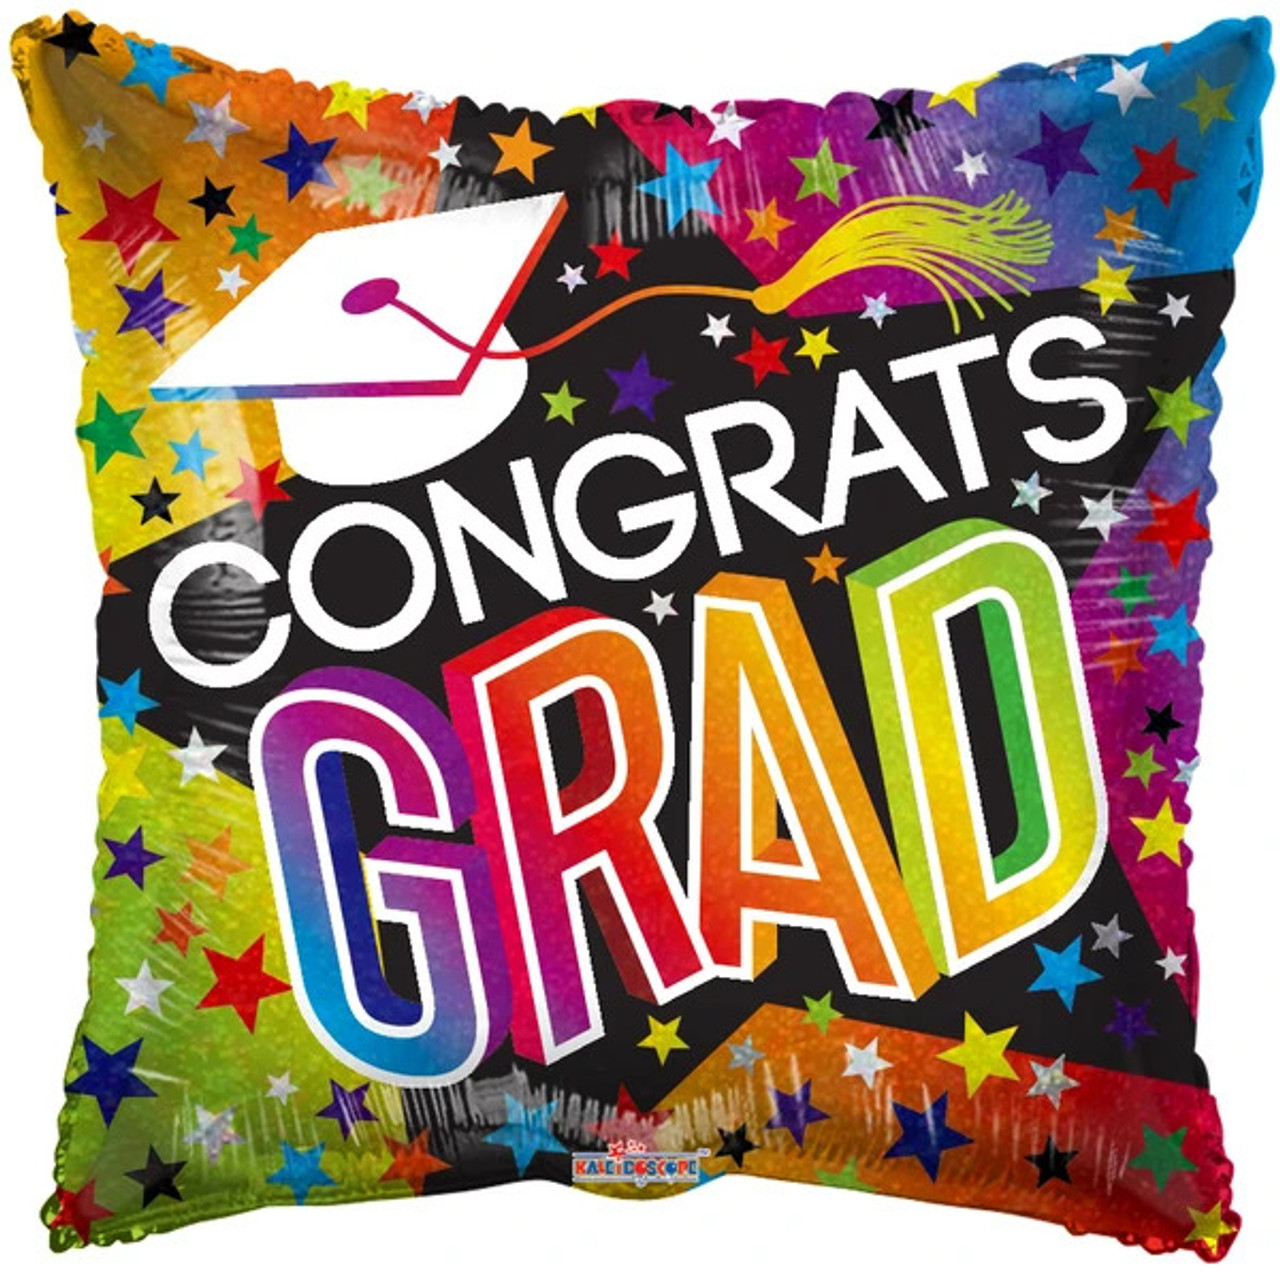 New! 30 Inch Giant Red Congratulations Graduate Magnetic Car Bow